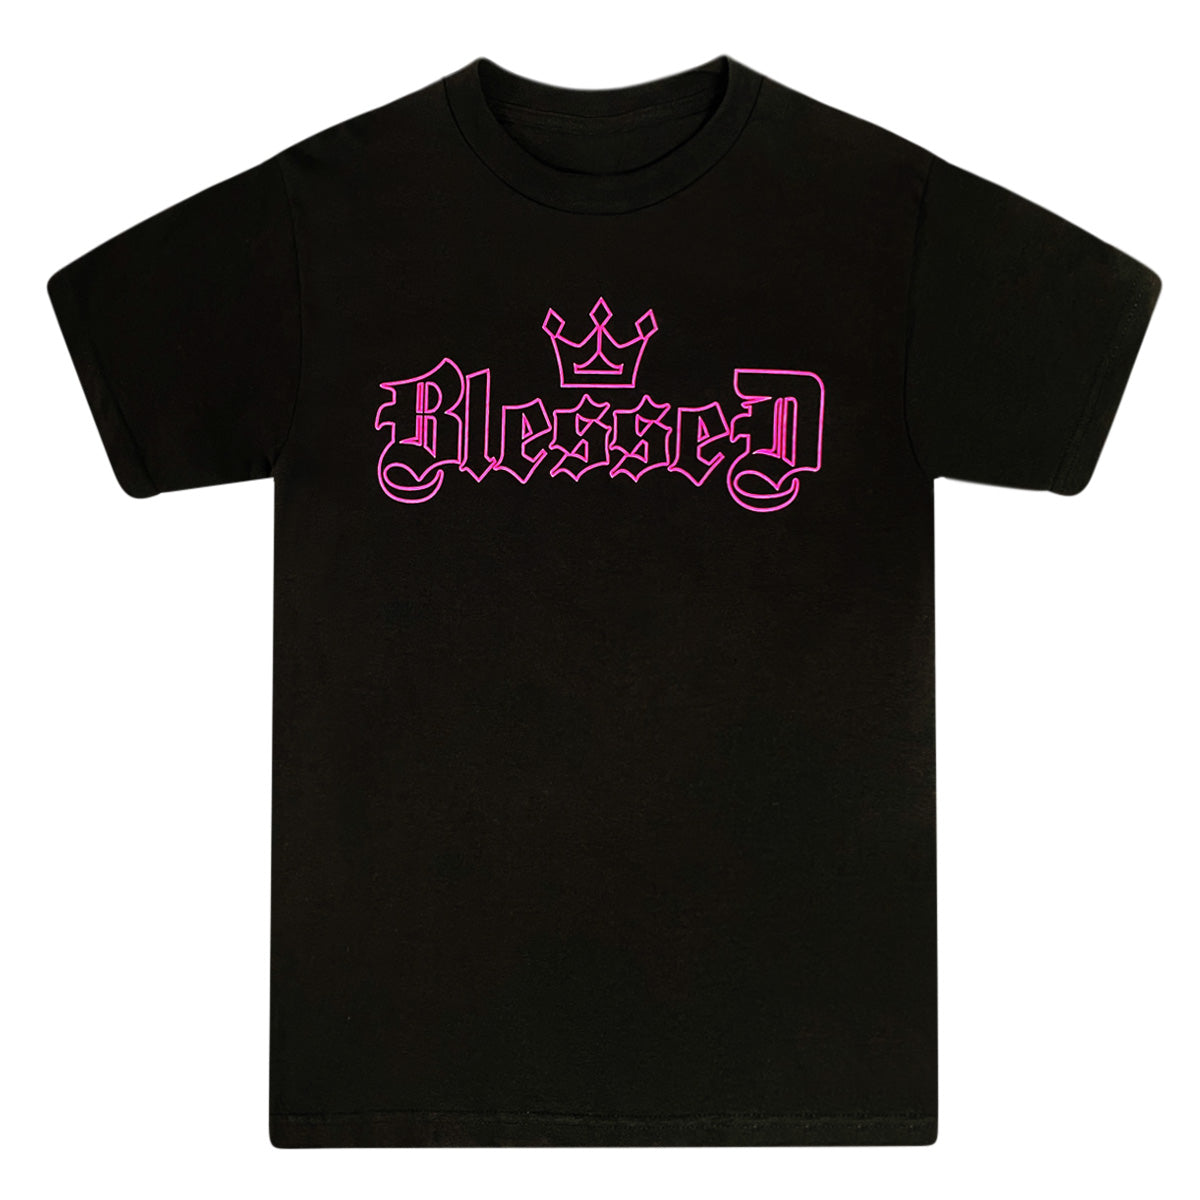 Blessed Tough Tee